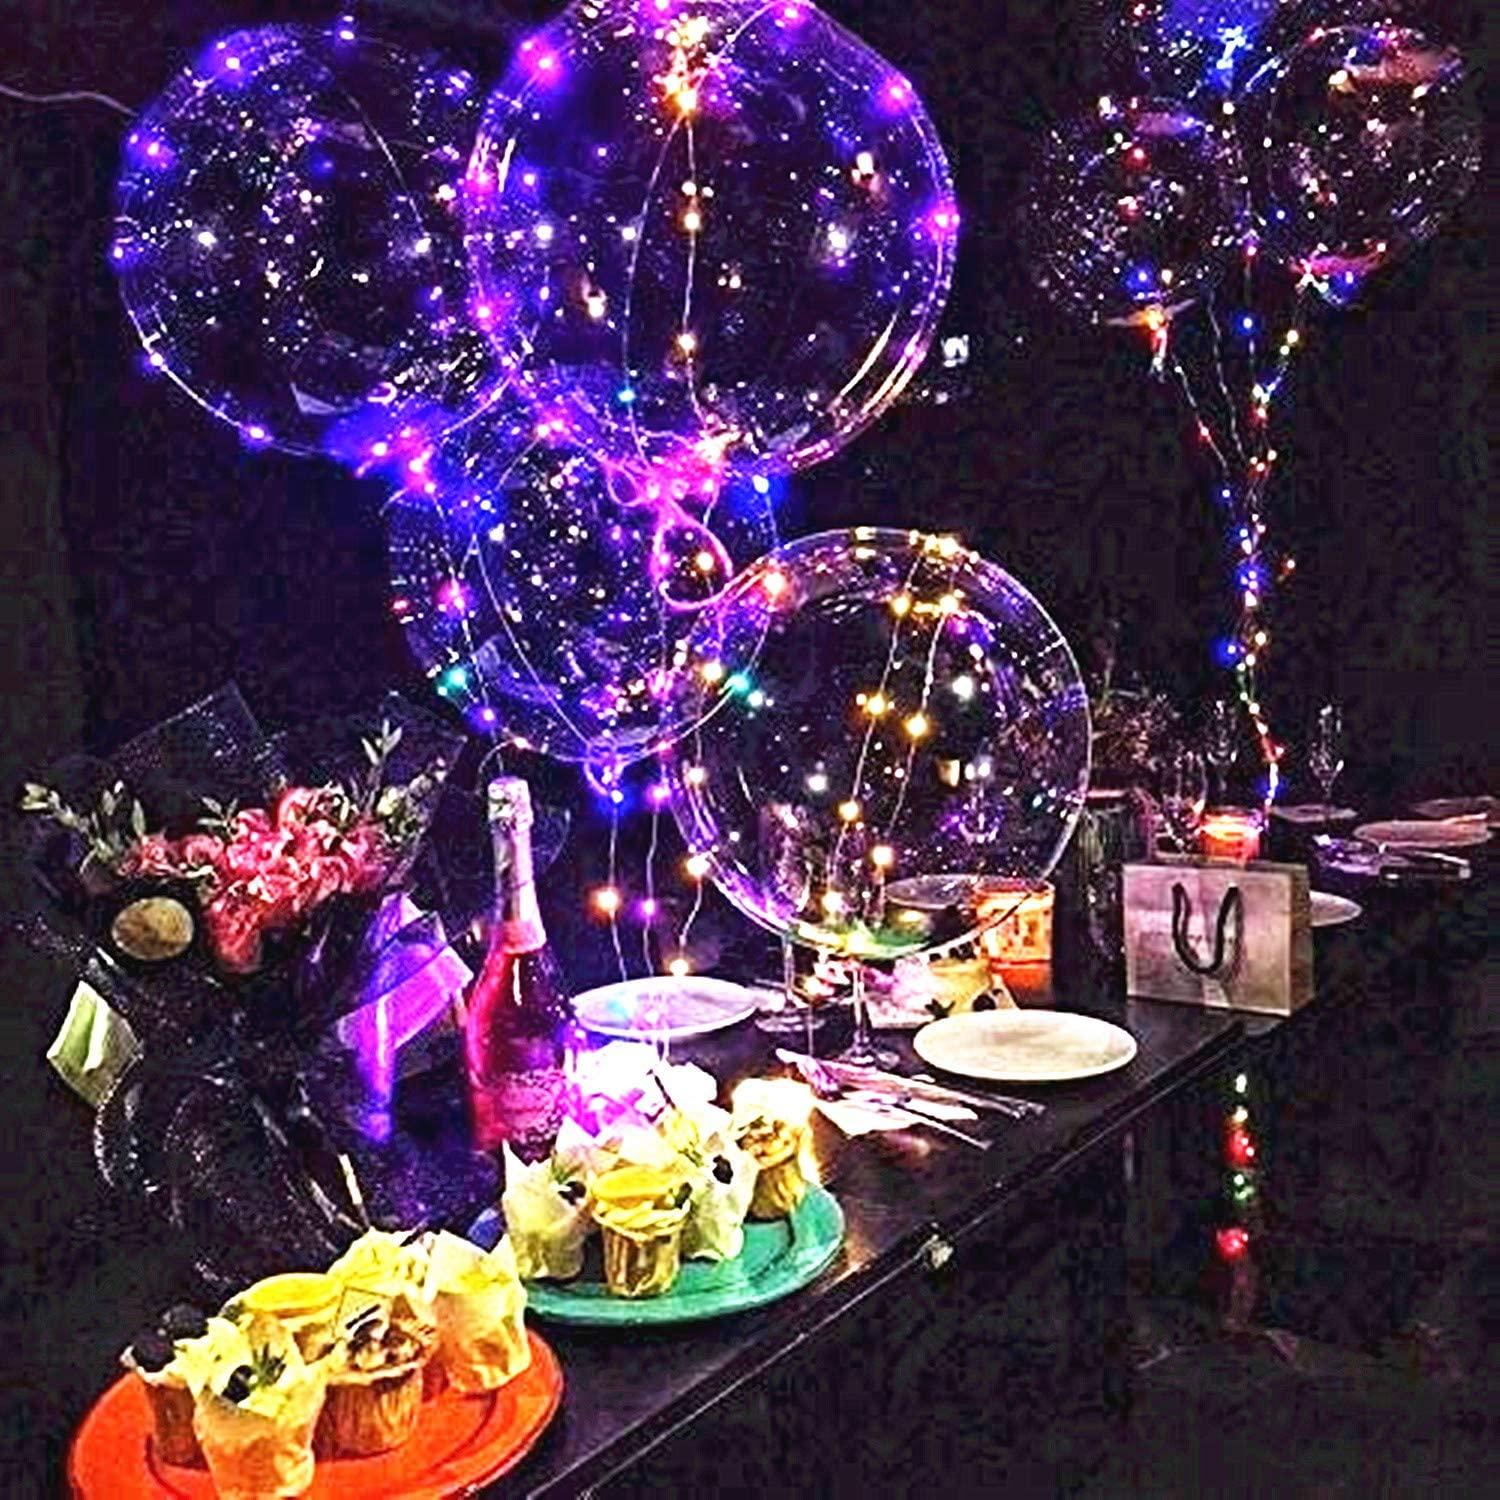 Purple Led Balloons for Prom and Graduation Party Decorations - If you say i do